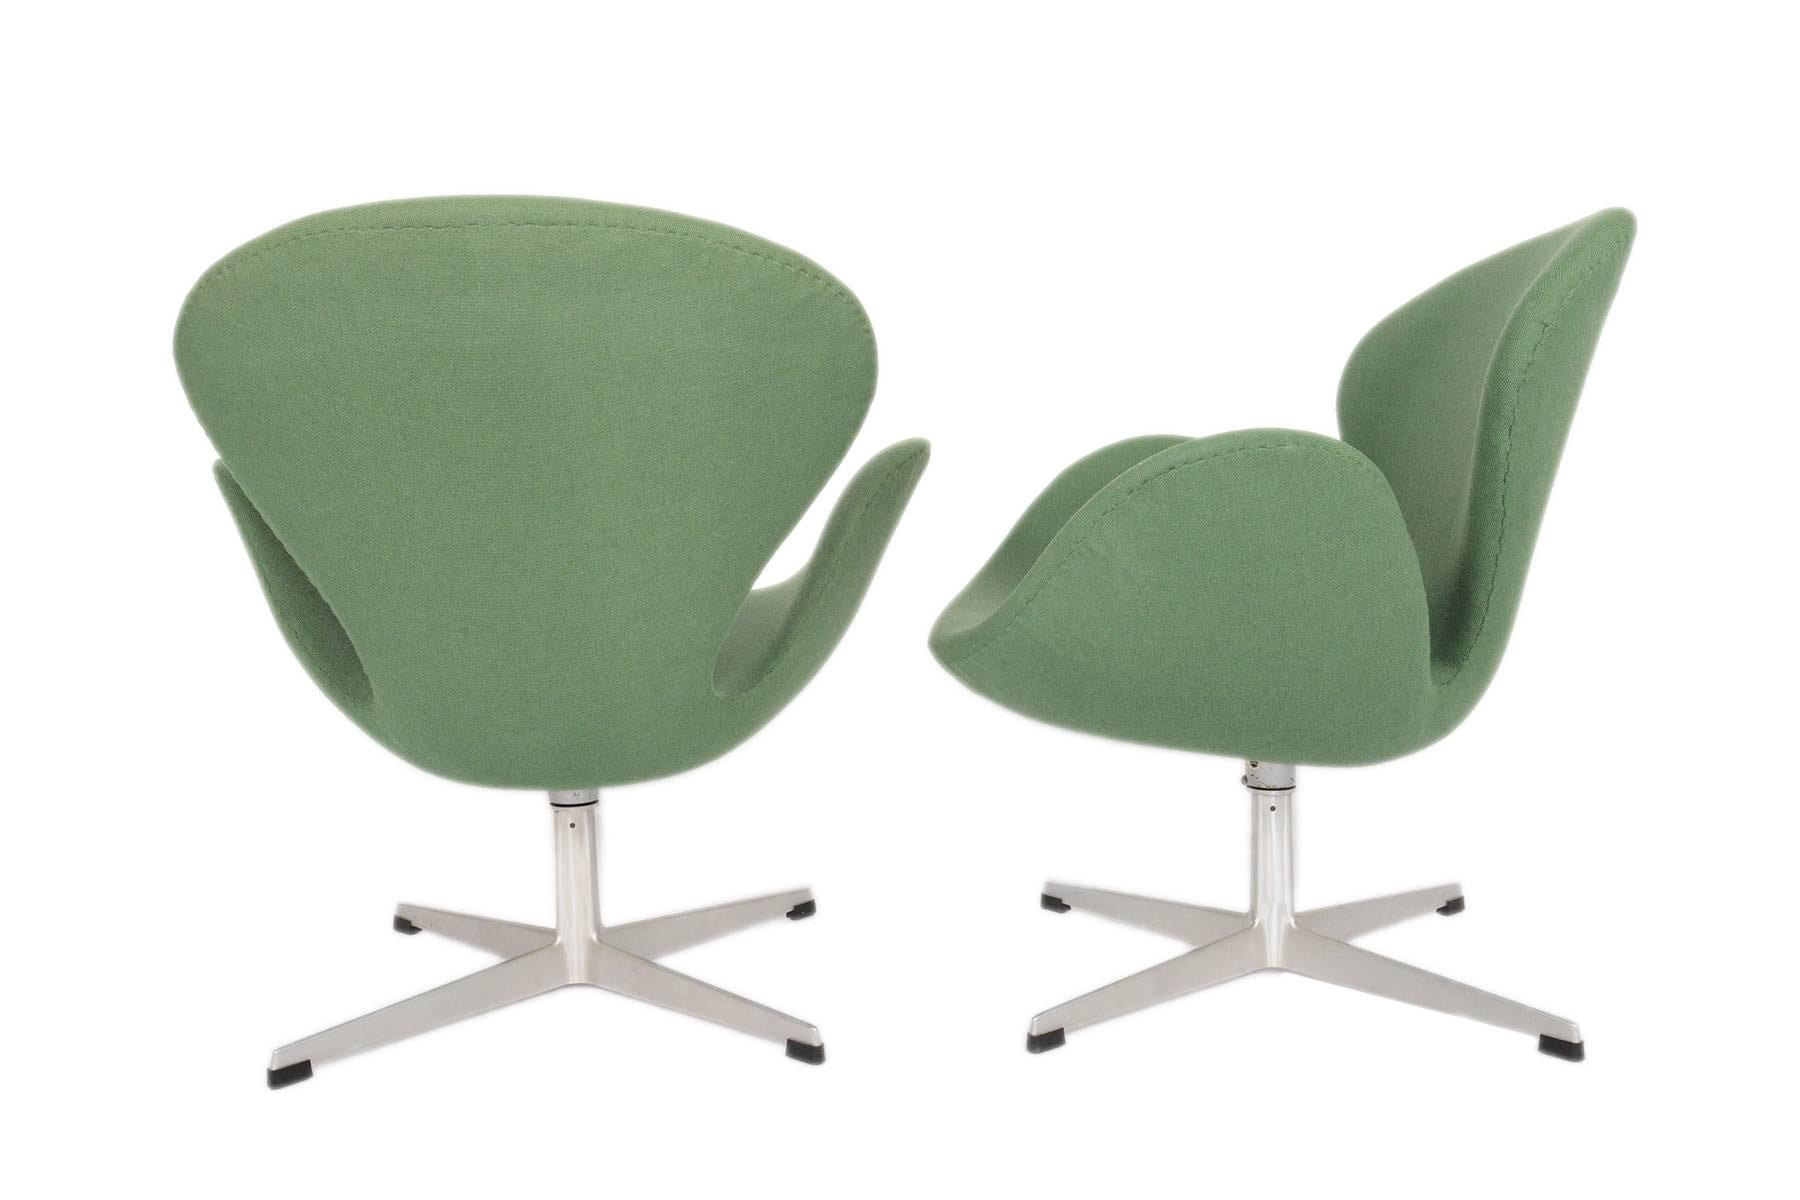 This stunning pair of Danish modern swan chairs was designed by Arne Jacobsen for Fritz Hansen in the late 1950s. Originally conceptualized for the SAS Royal Copenhagen Hotel, these chairs are quintessential icons of Scandinavian design. The chair